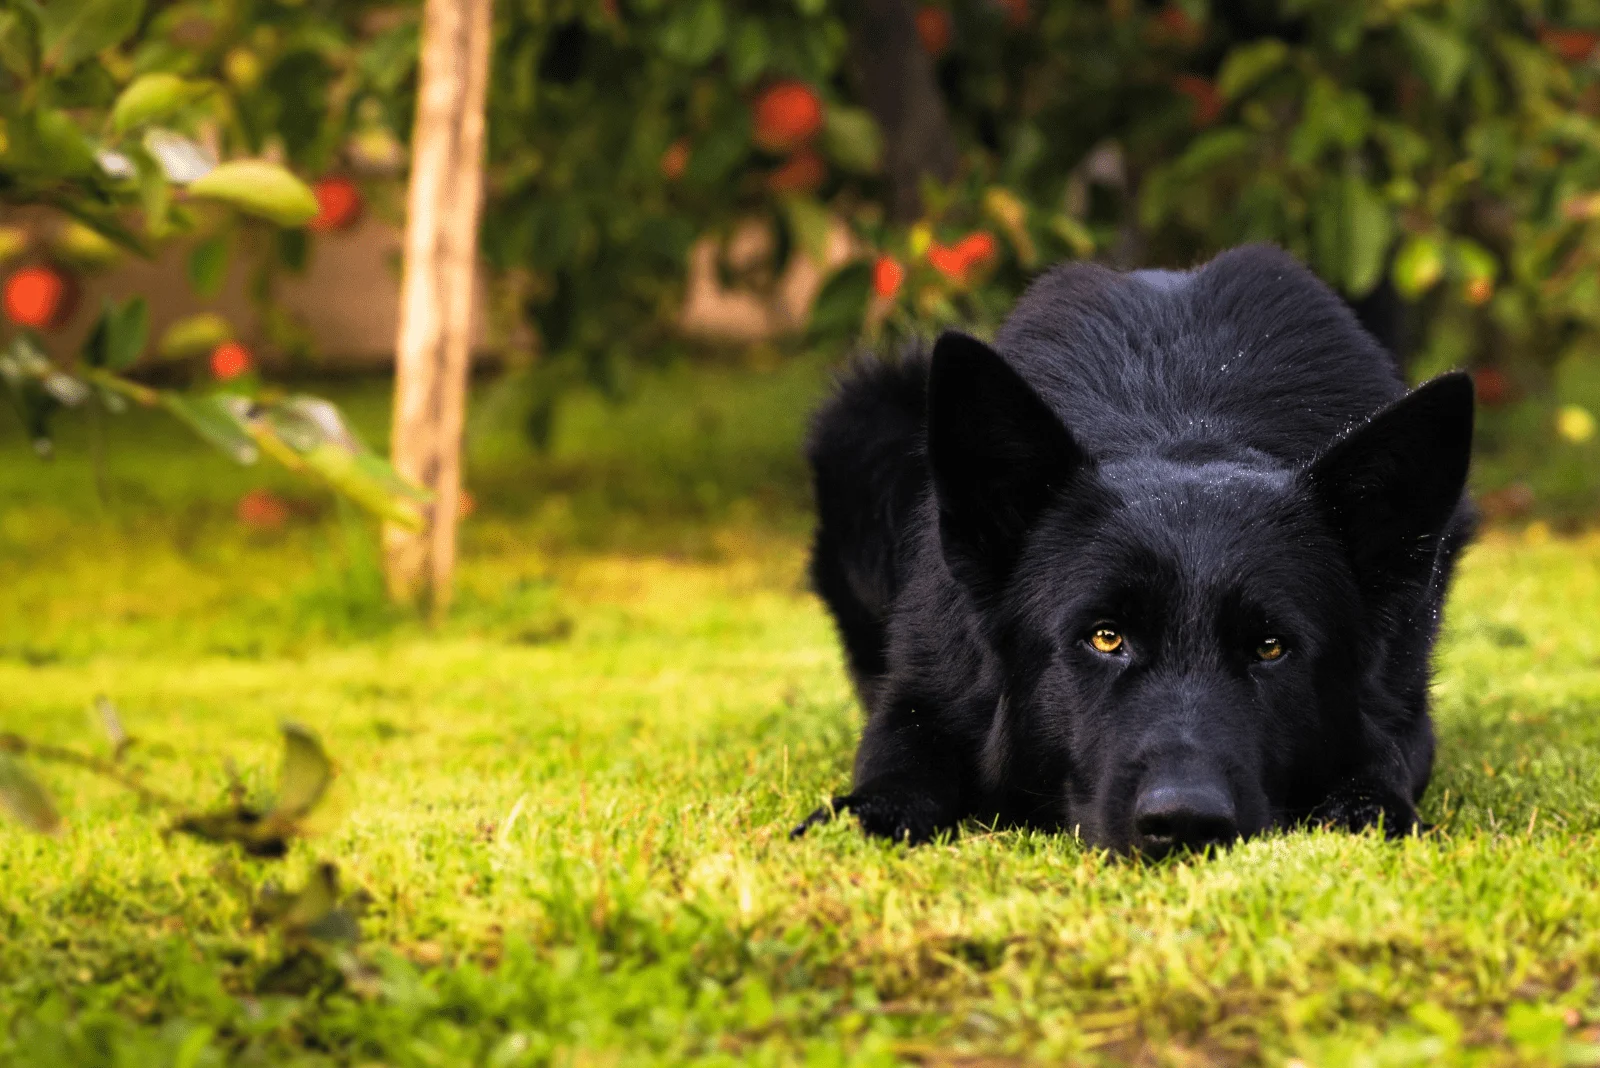 Black German Shepherd is lying and resting on the grass